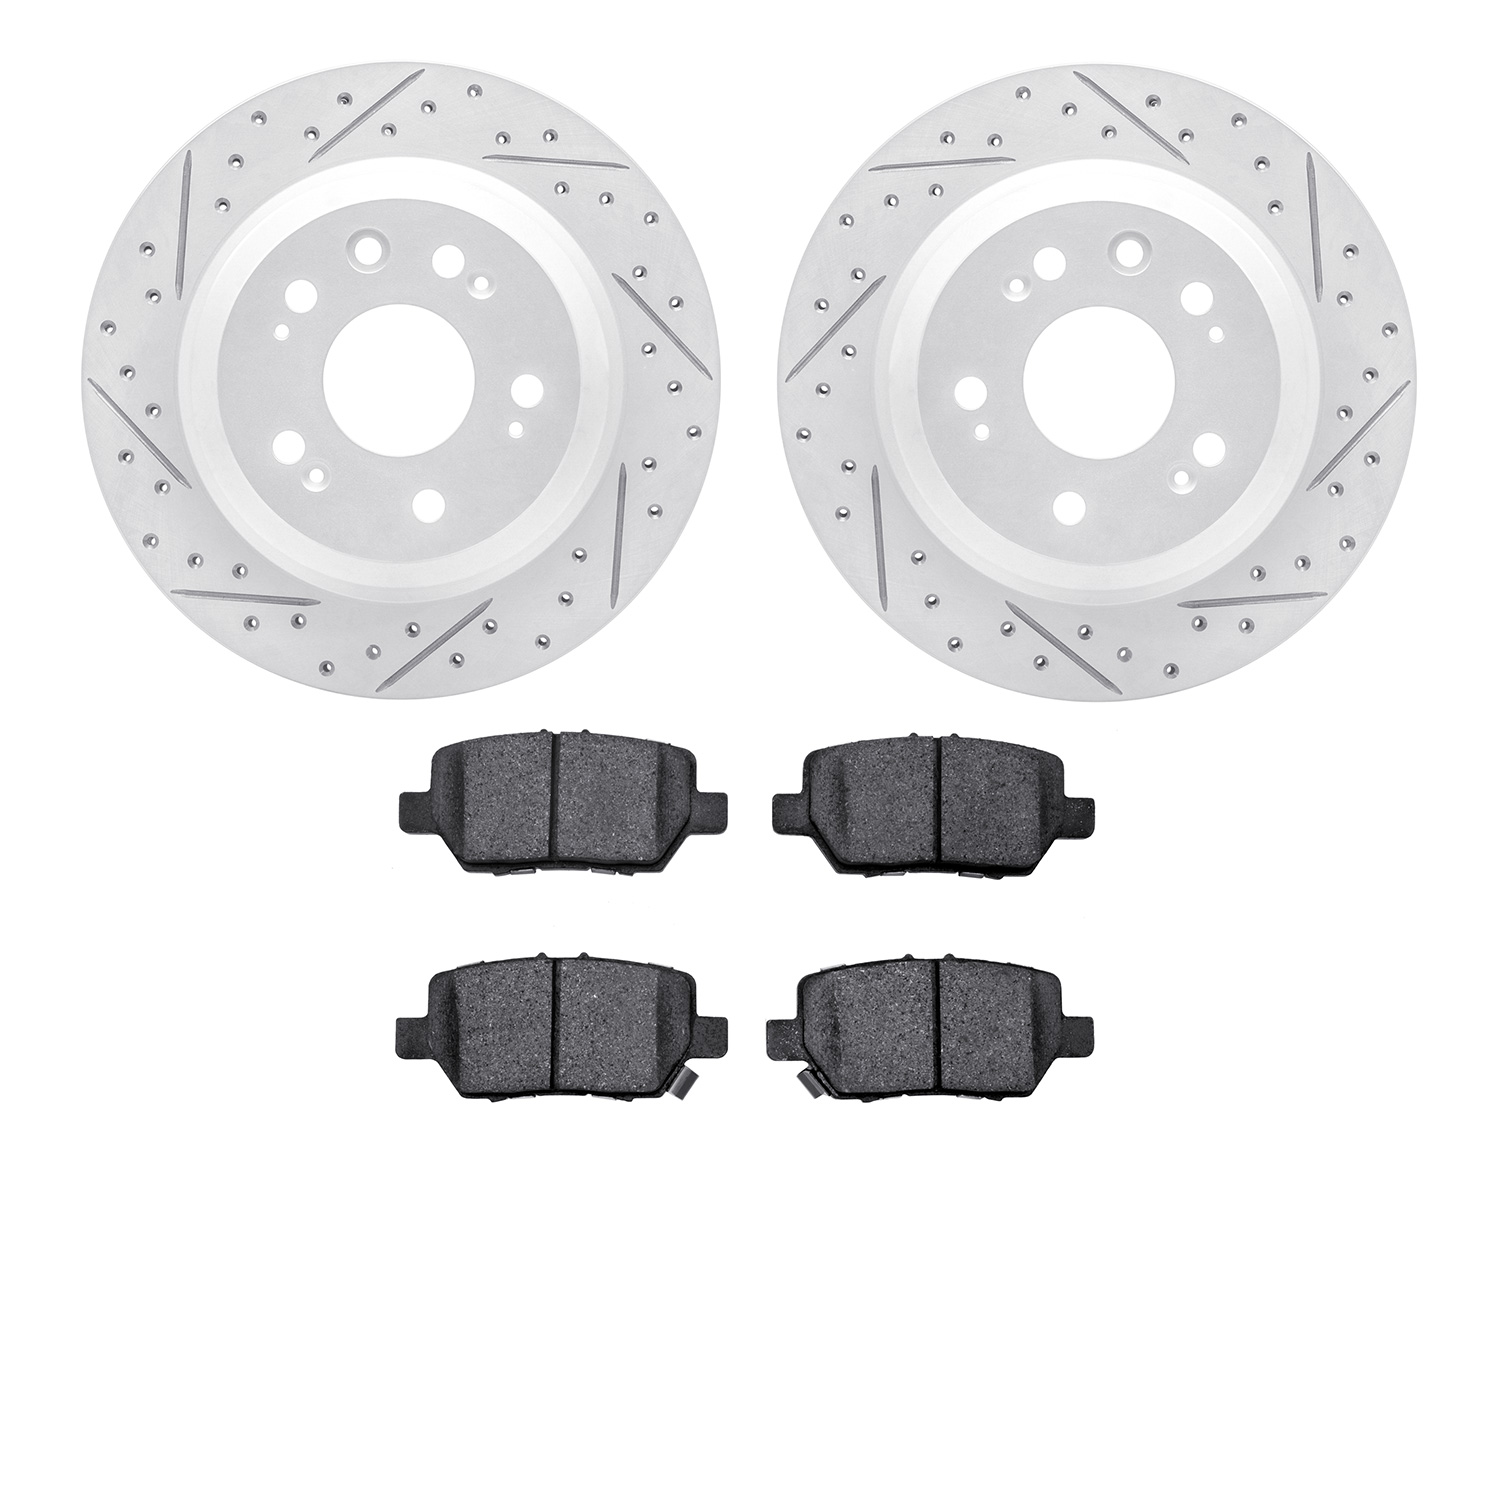 2502-58017 Geoperformance Drilled/Slotted Rotors w/5000 Advanced Brake Pads Kit, 2005-2012 Acura/Honda, Position: Rear